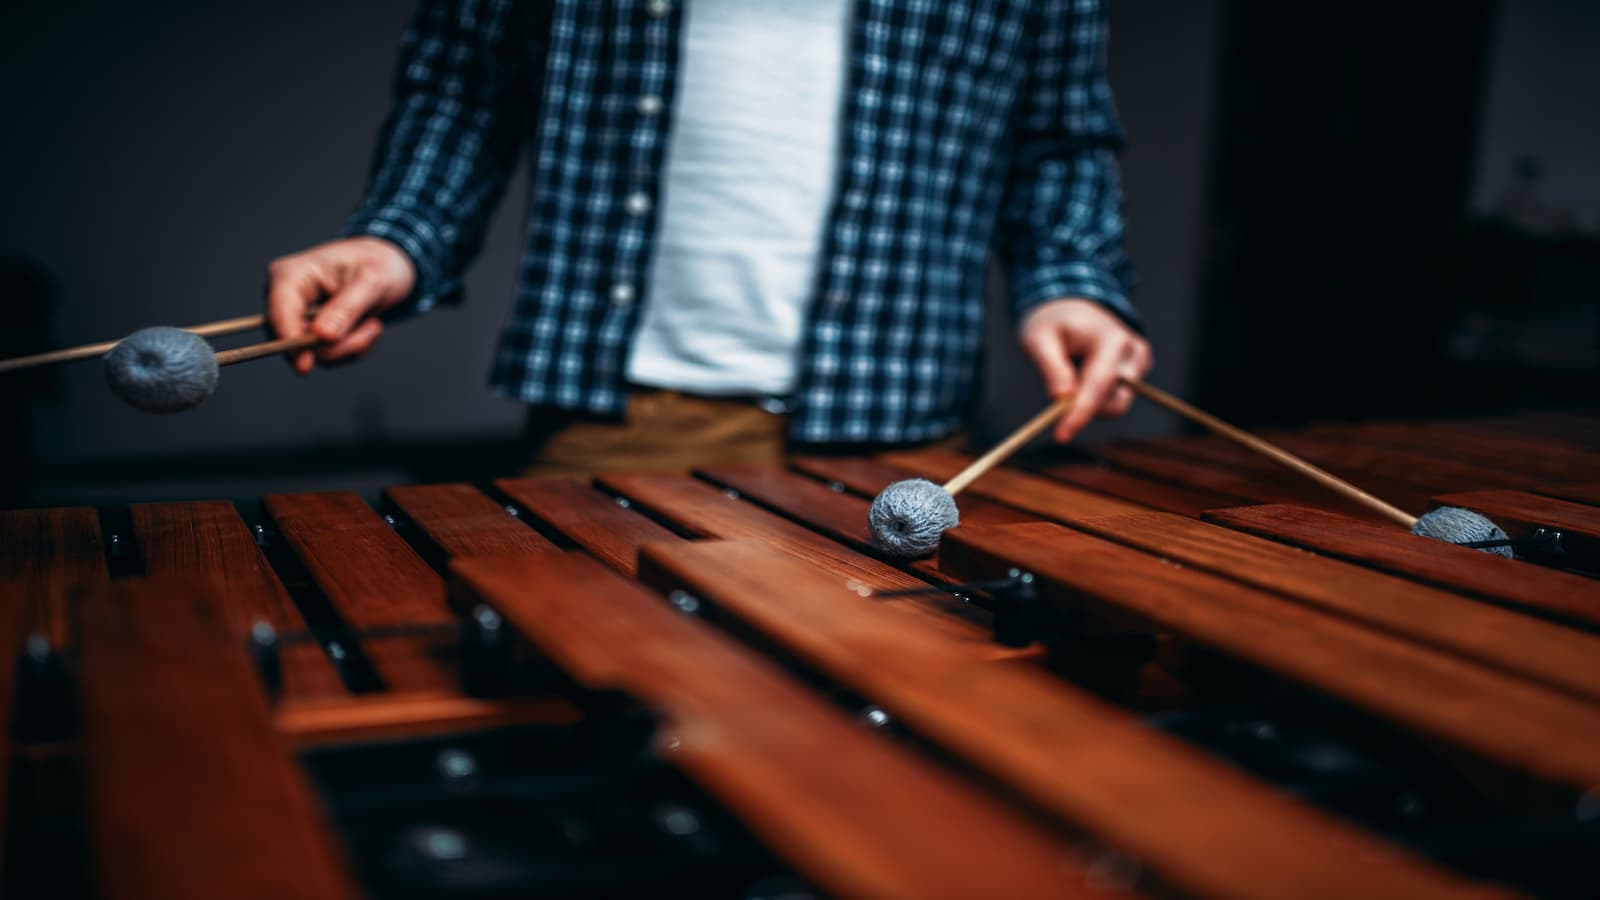 17 Songs with Xylophones In Them